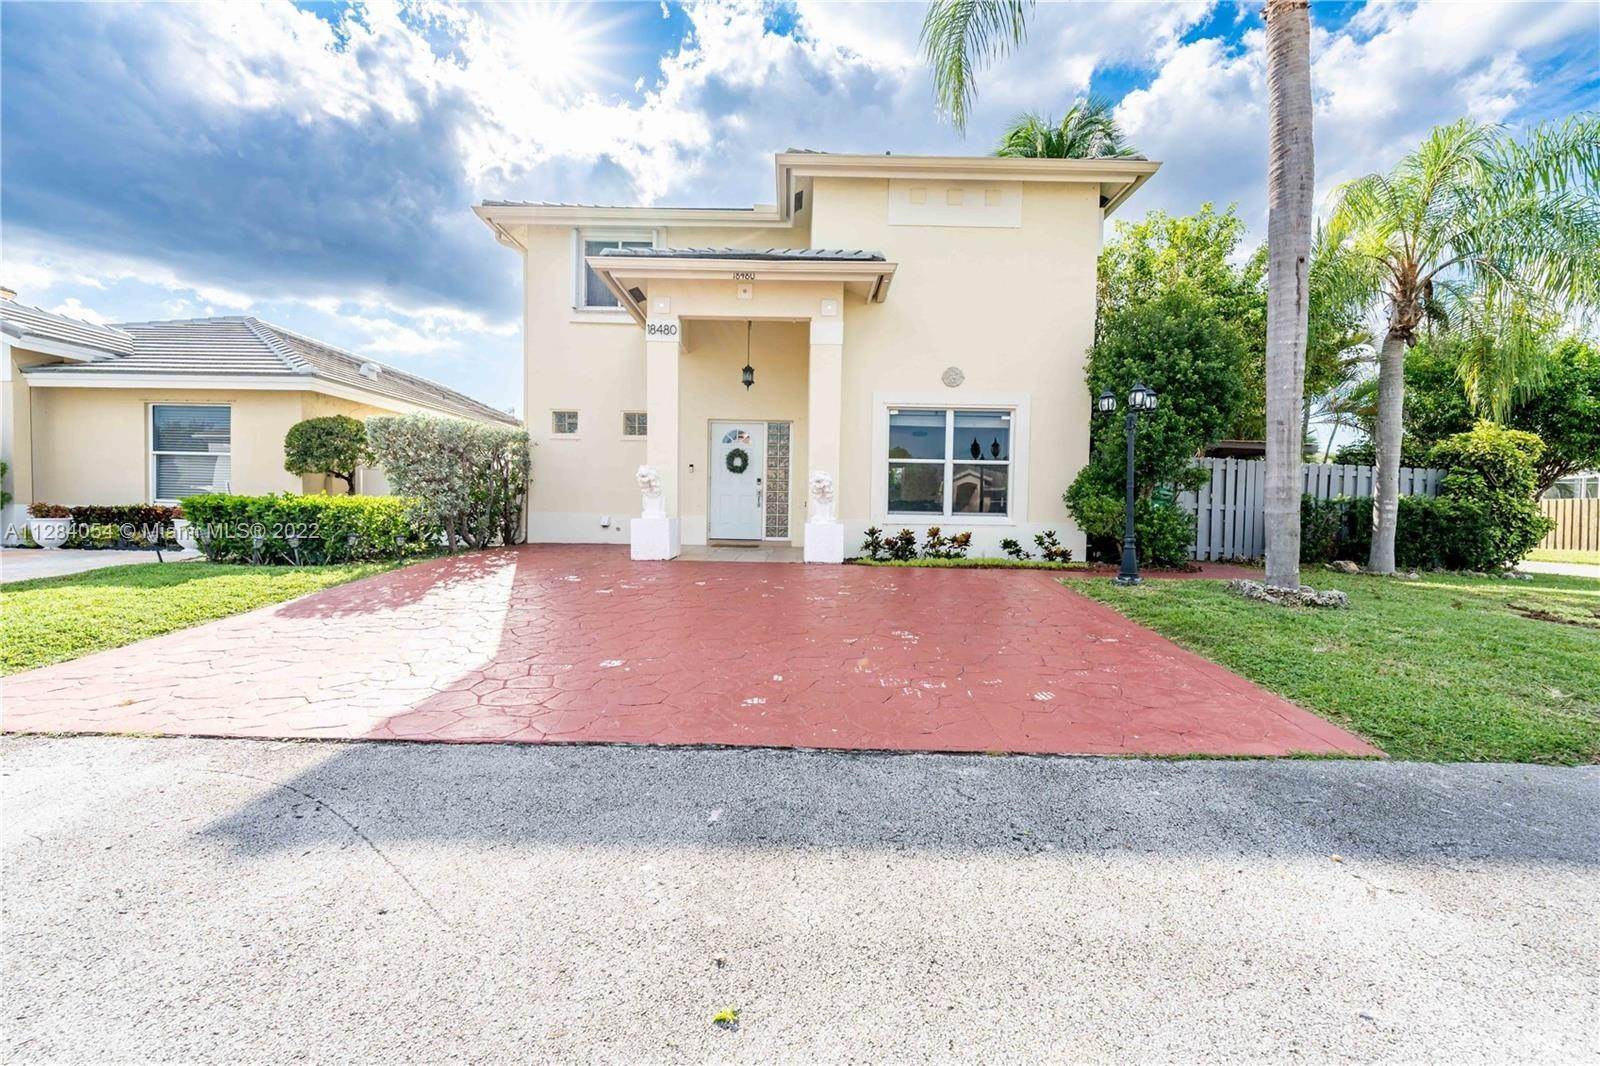 Single Family for Sale at Opa Locka, FL 33055